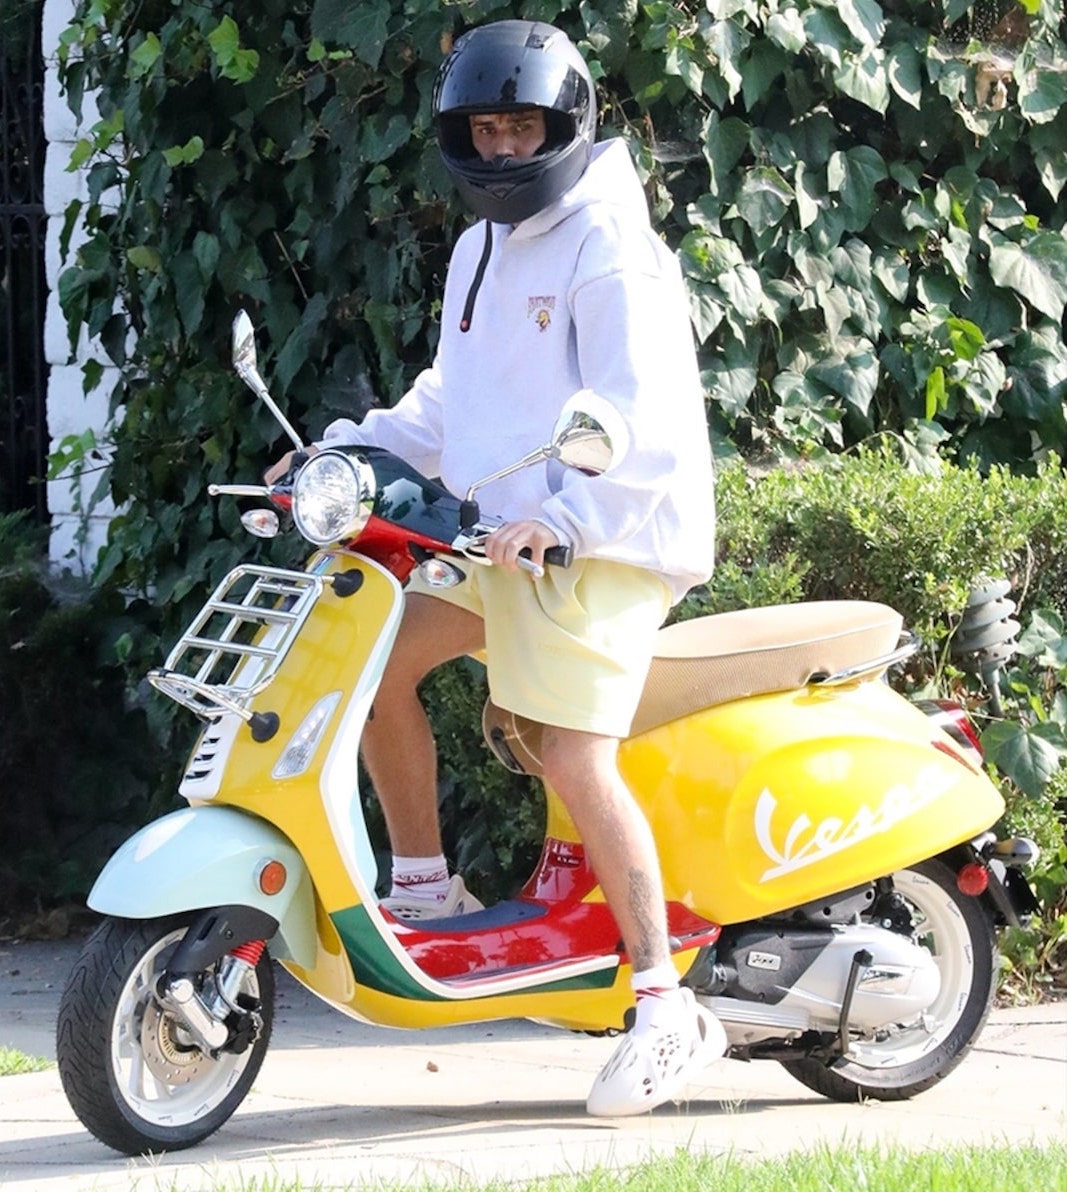 A view of Justin Bieber's recent collaboration with Vespa, including his use of a machine pre-collab